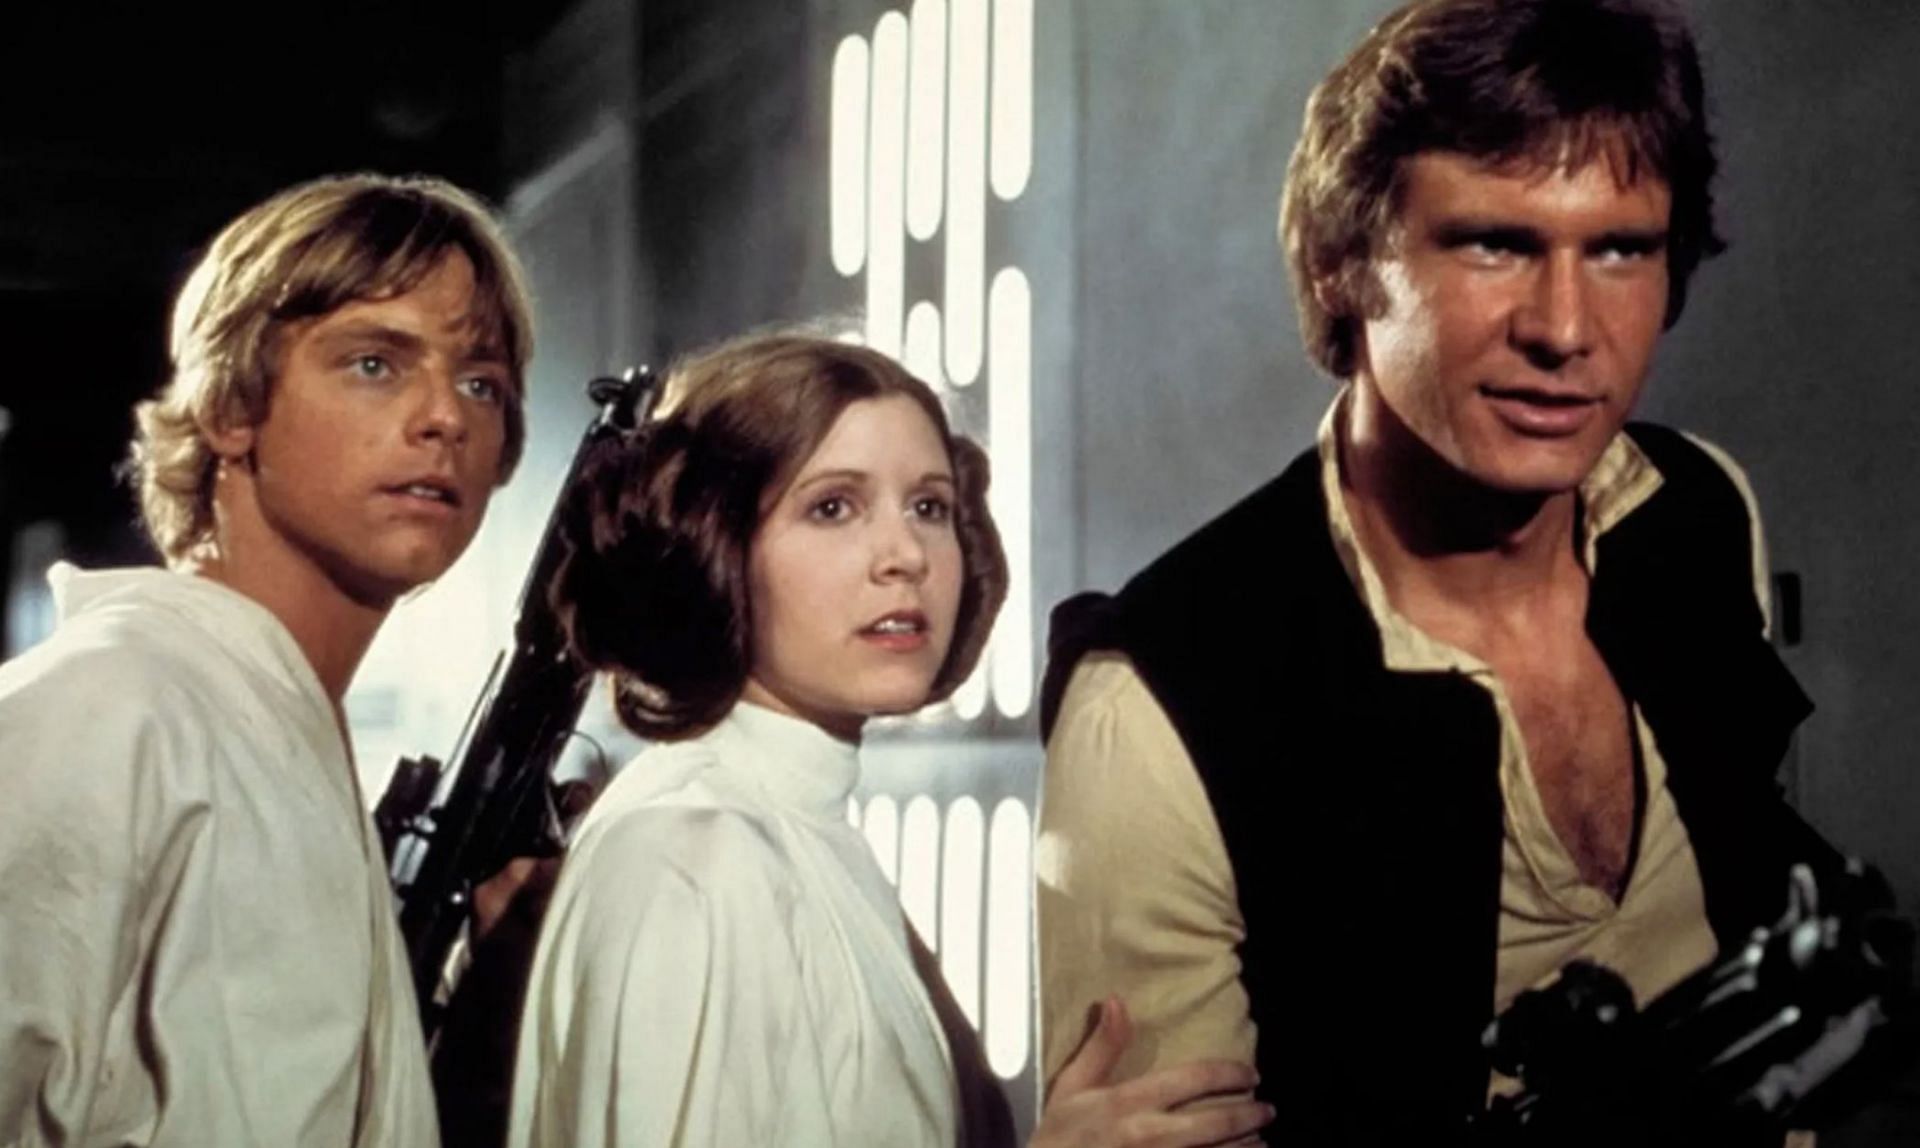 Han rescues Princess Leia from the Death Star (Image via Lucasfilm)